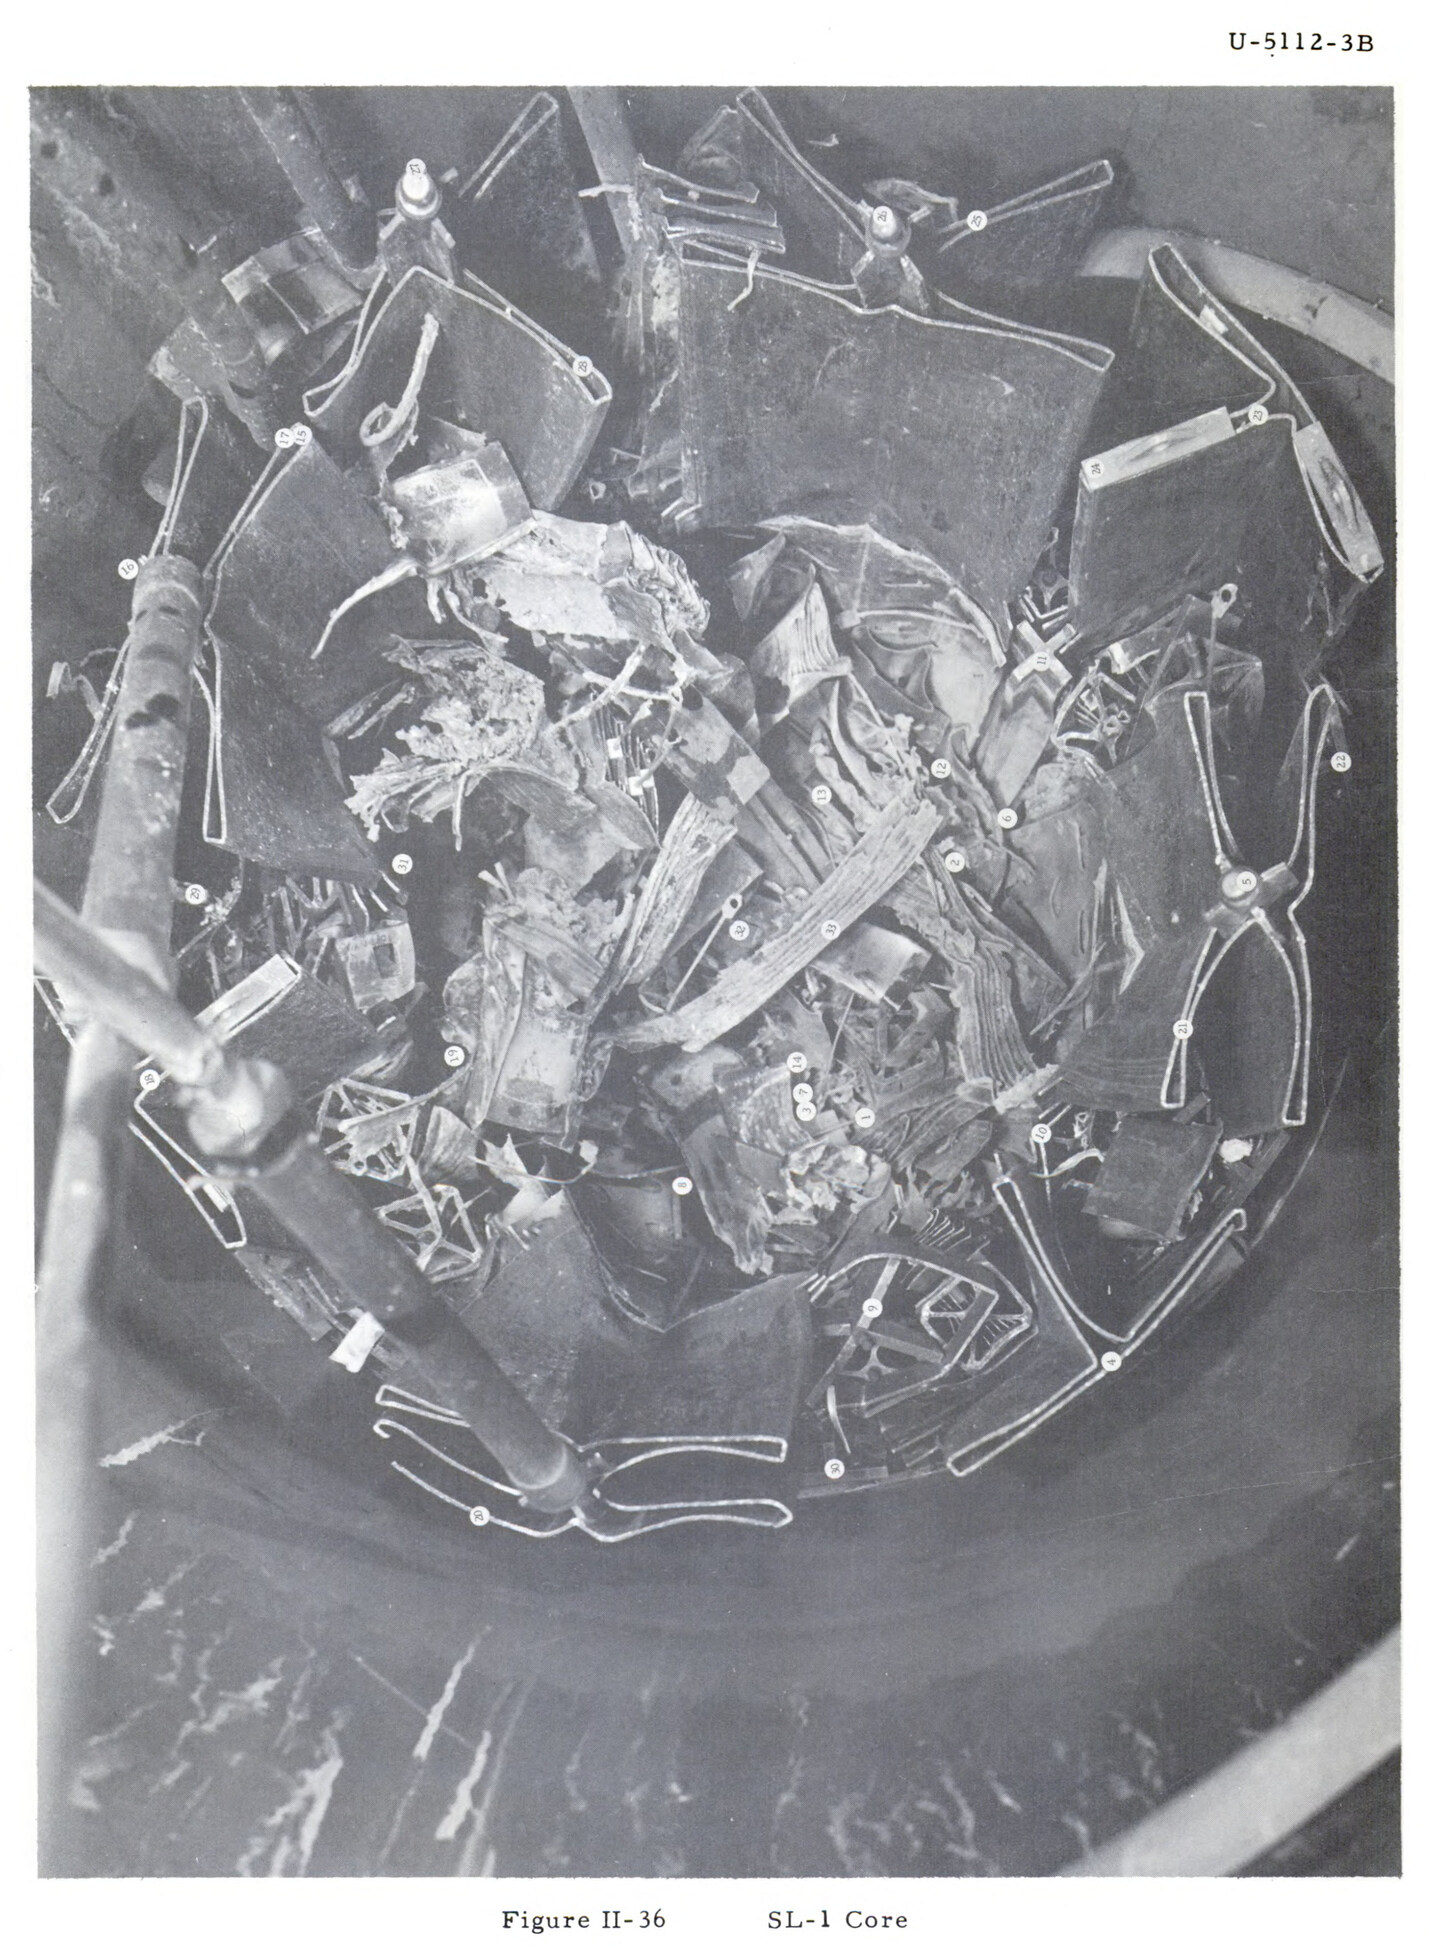 The destroyed SL-1 nuclear core after the accident